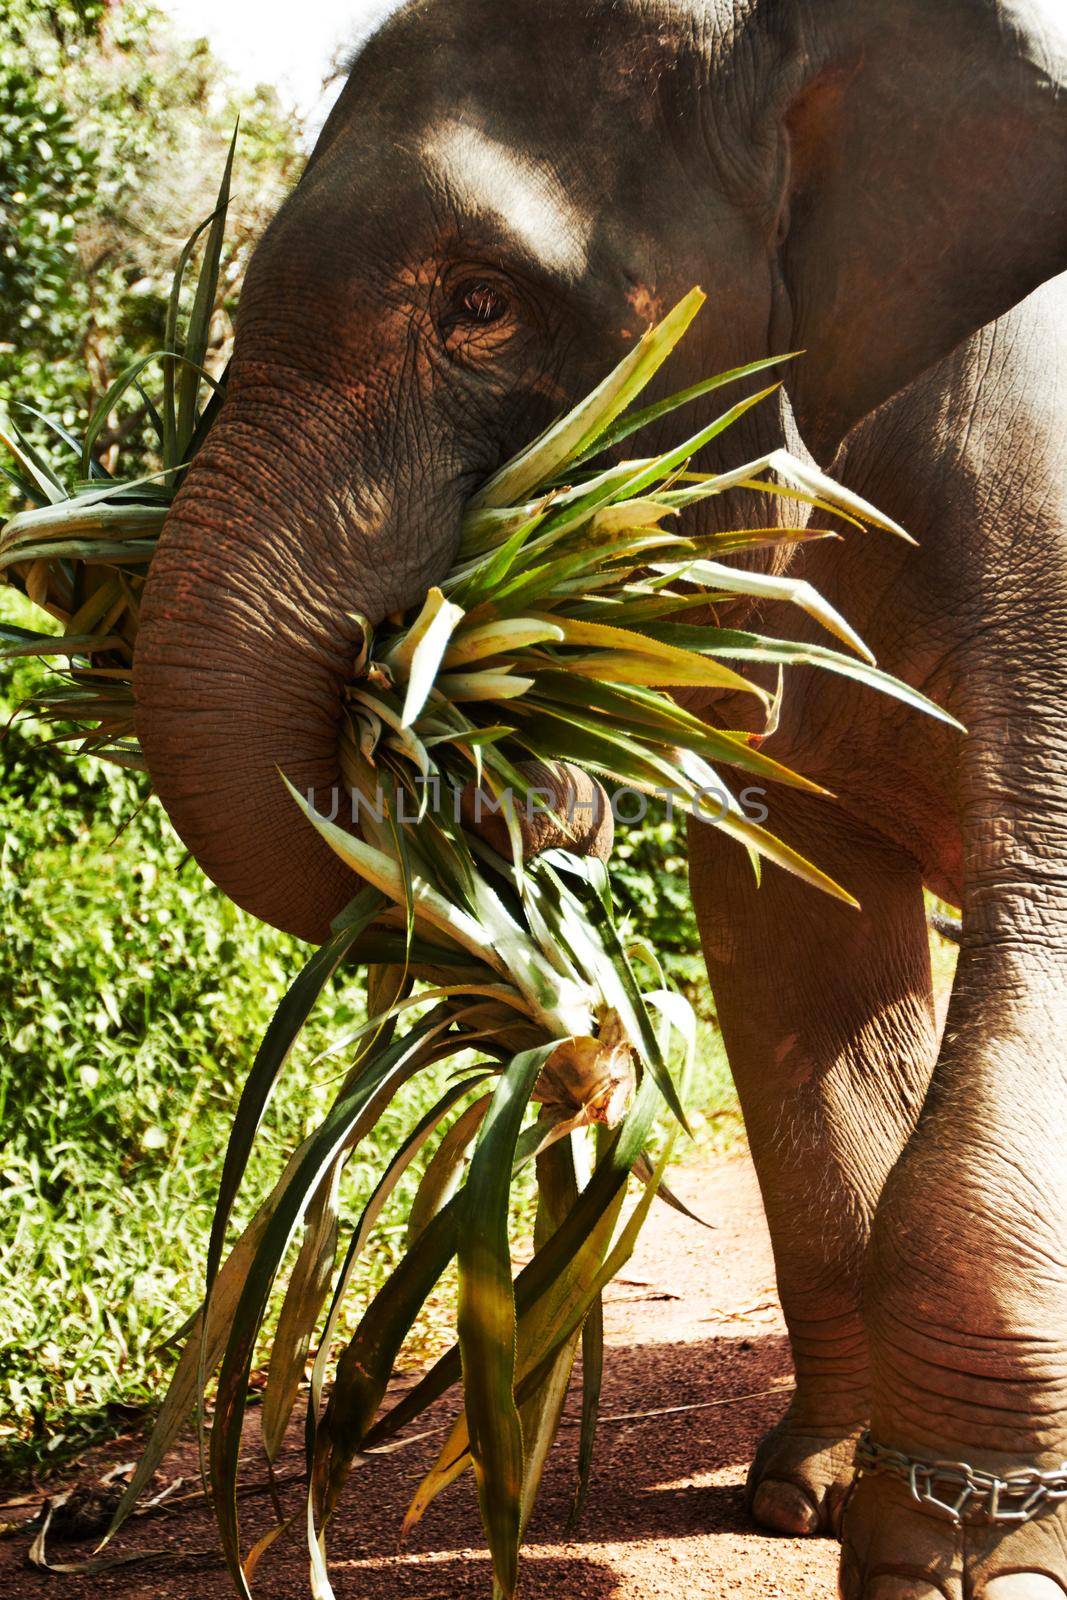 Side-view of an Asian elephant carrying leaves.